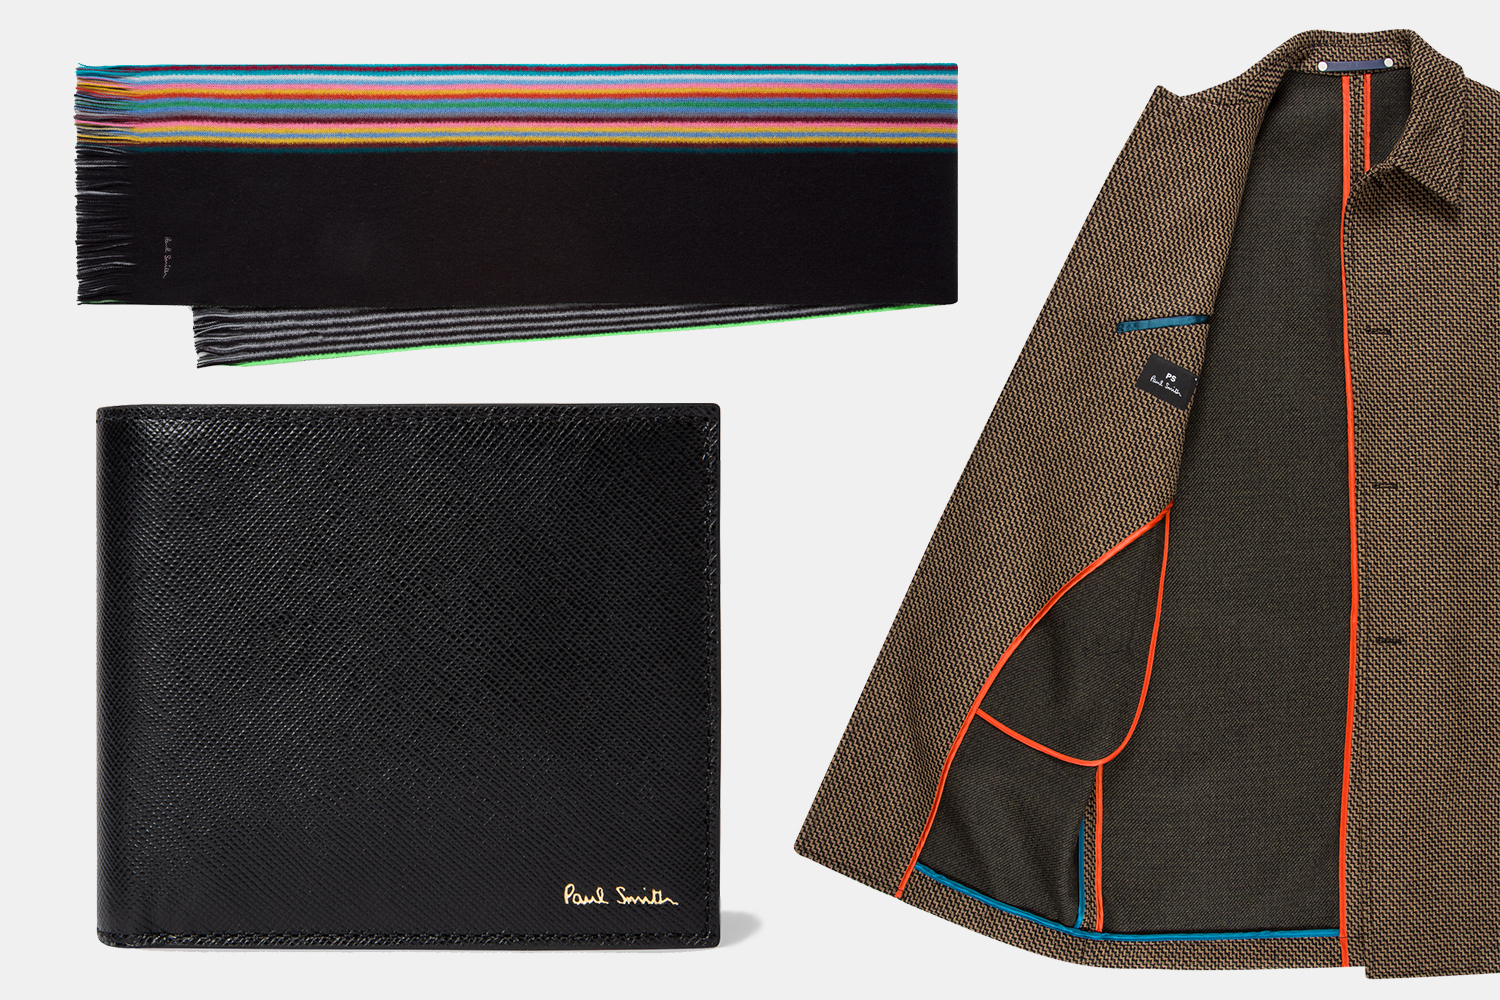 Paul Smith menswear and accessories sale